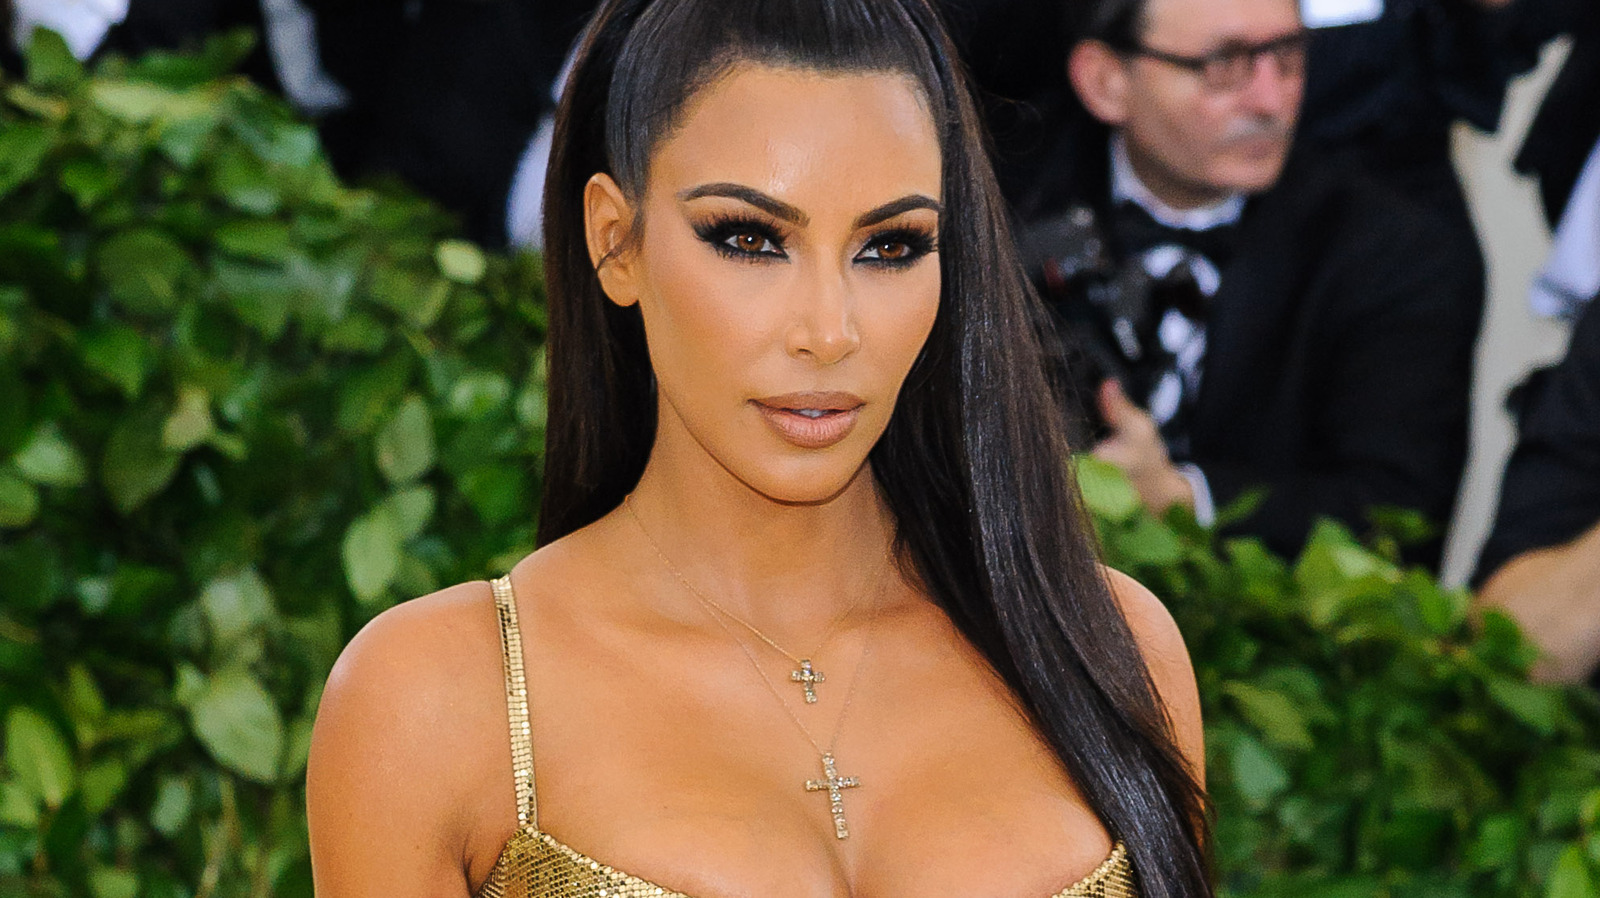 Kim Kardashian Sparks Demand For Tanning Beds – Here’s Why This Is Troubling